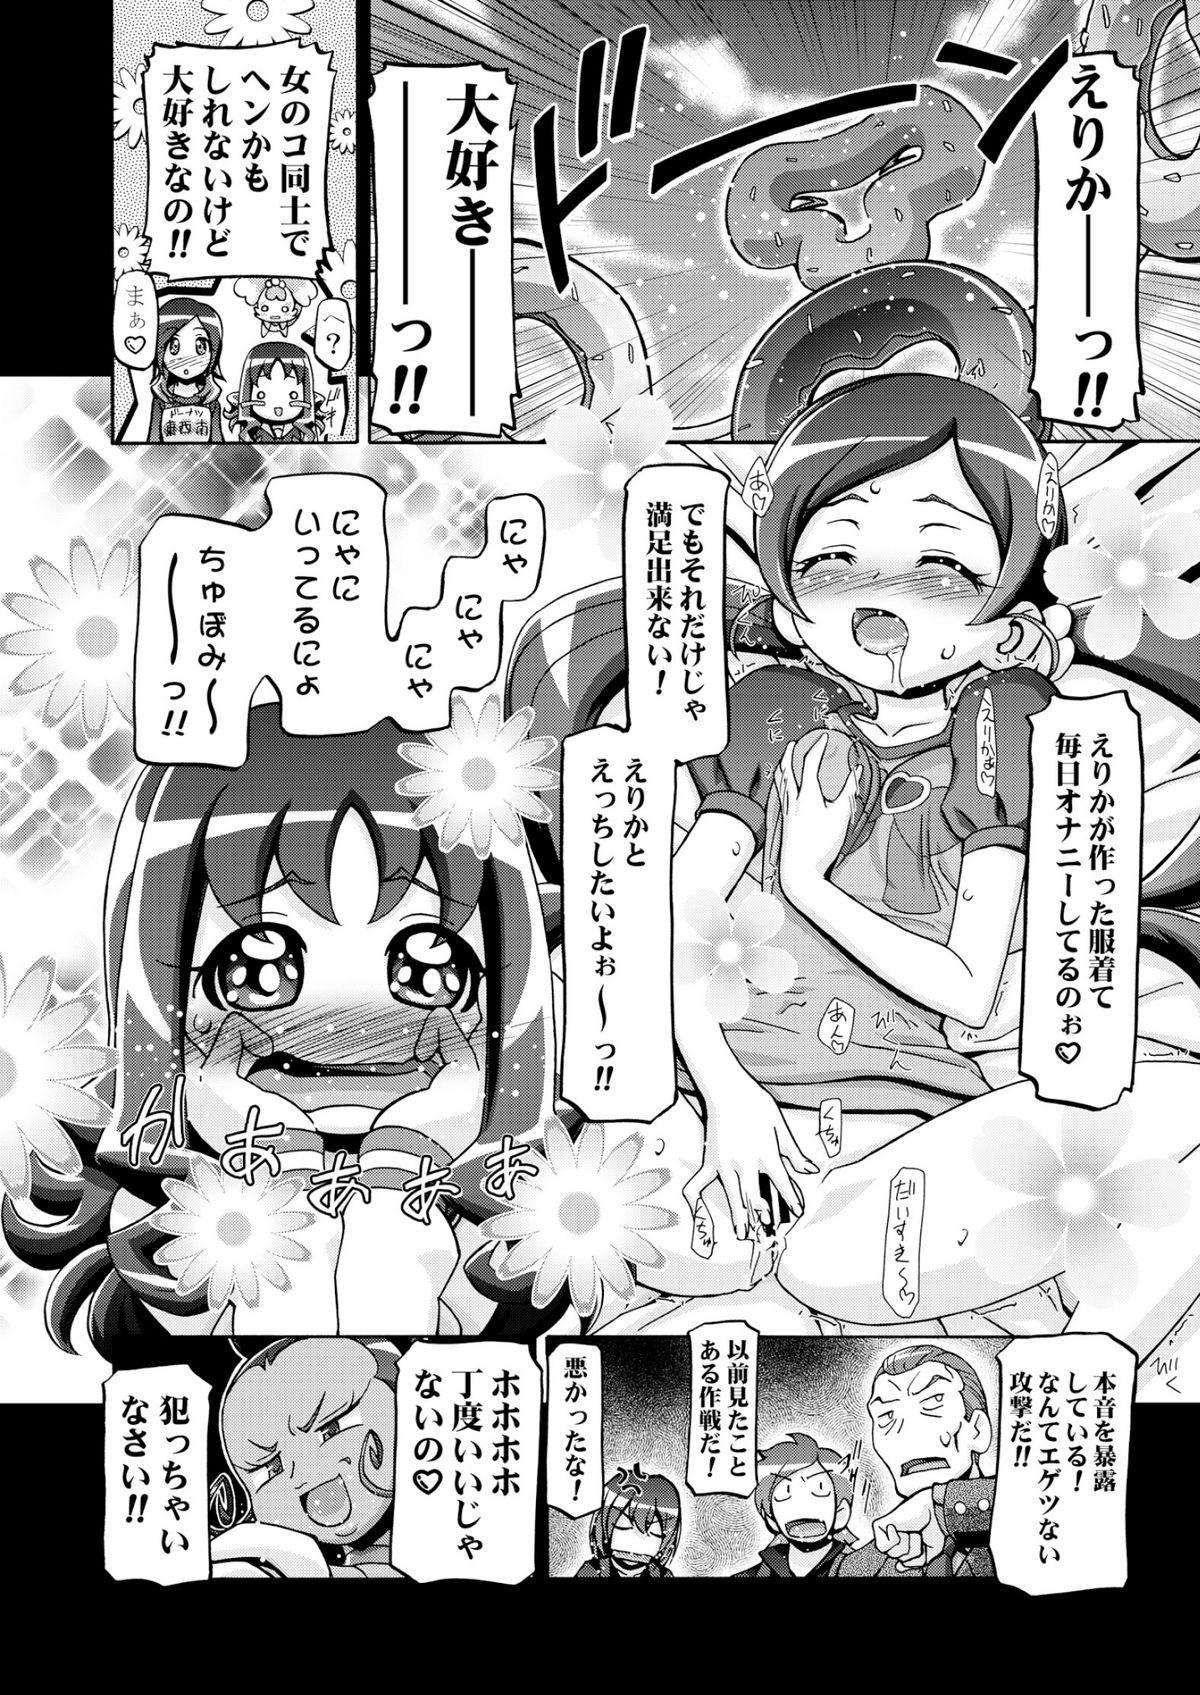 Free 18 Year Old Porn Hato puni - Heartcatch precure Facesitting - Page 11